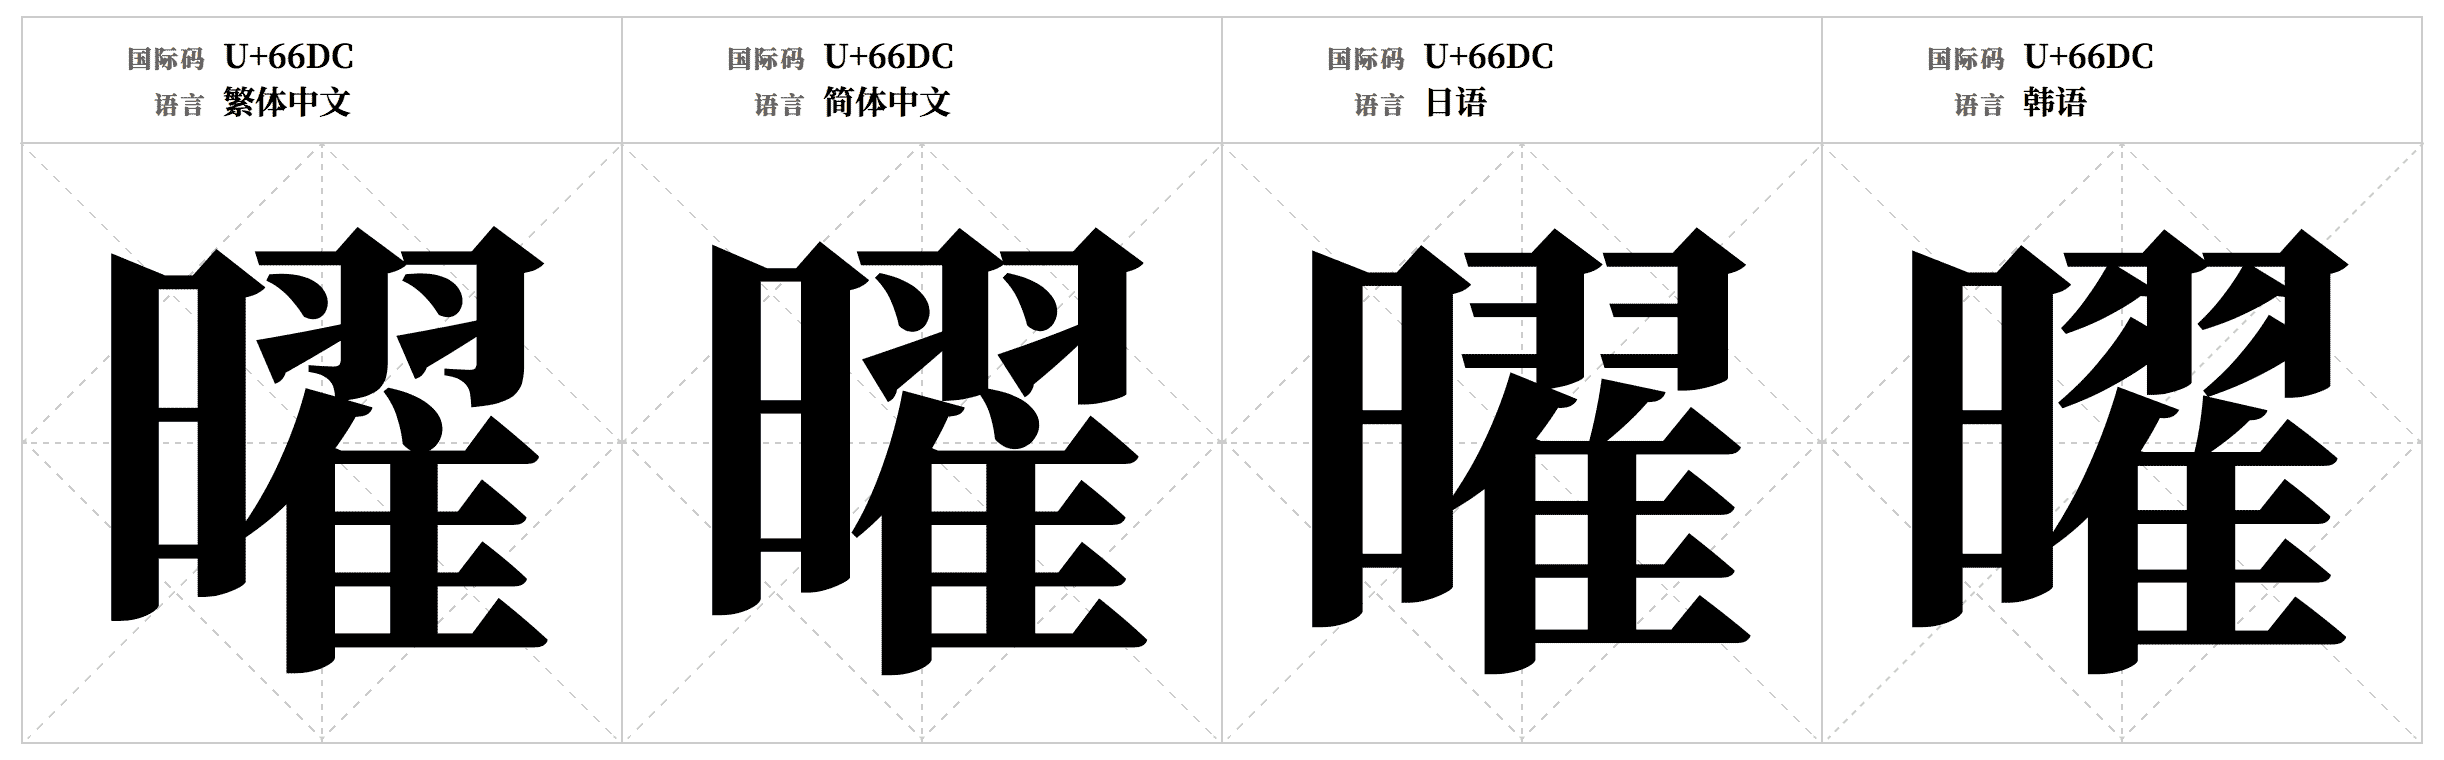 Siyuan Song Typeface, how to evaluate it, and how to use it correctly